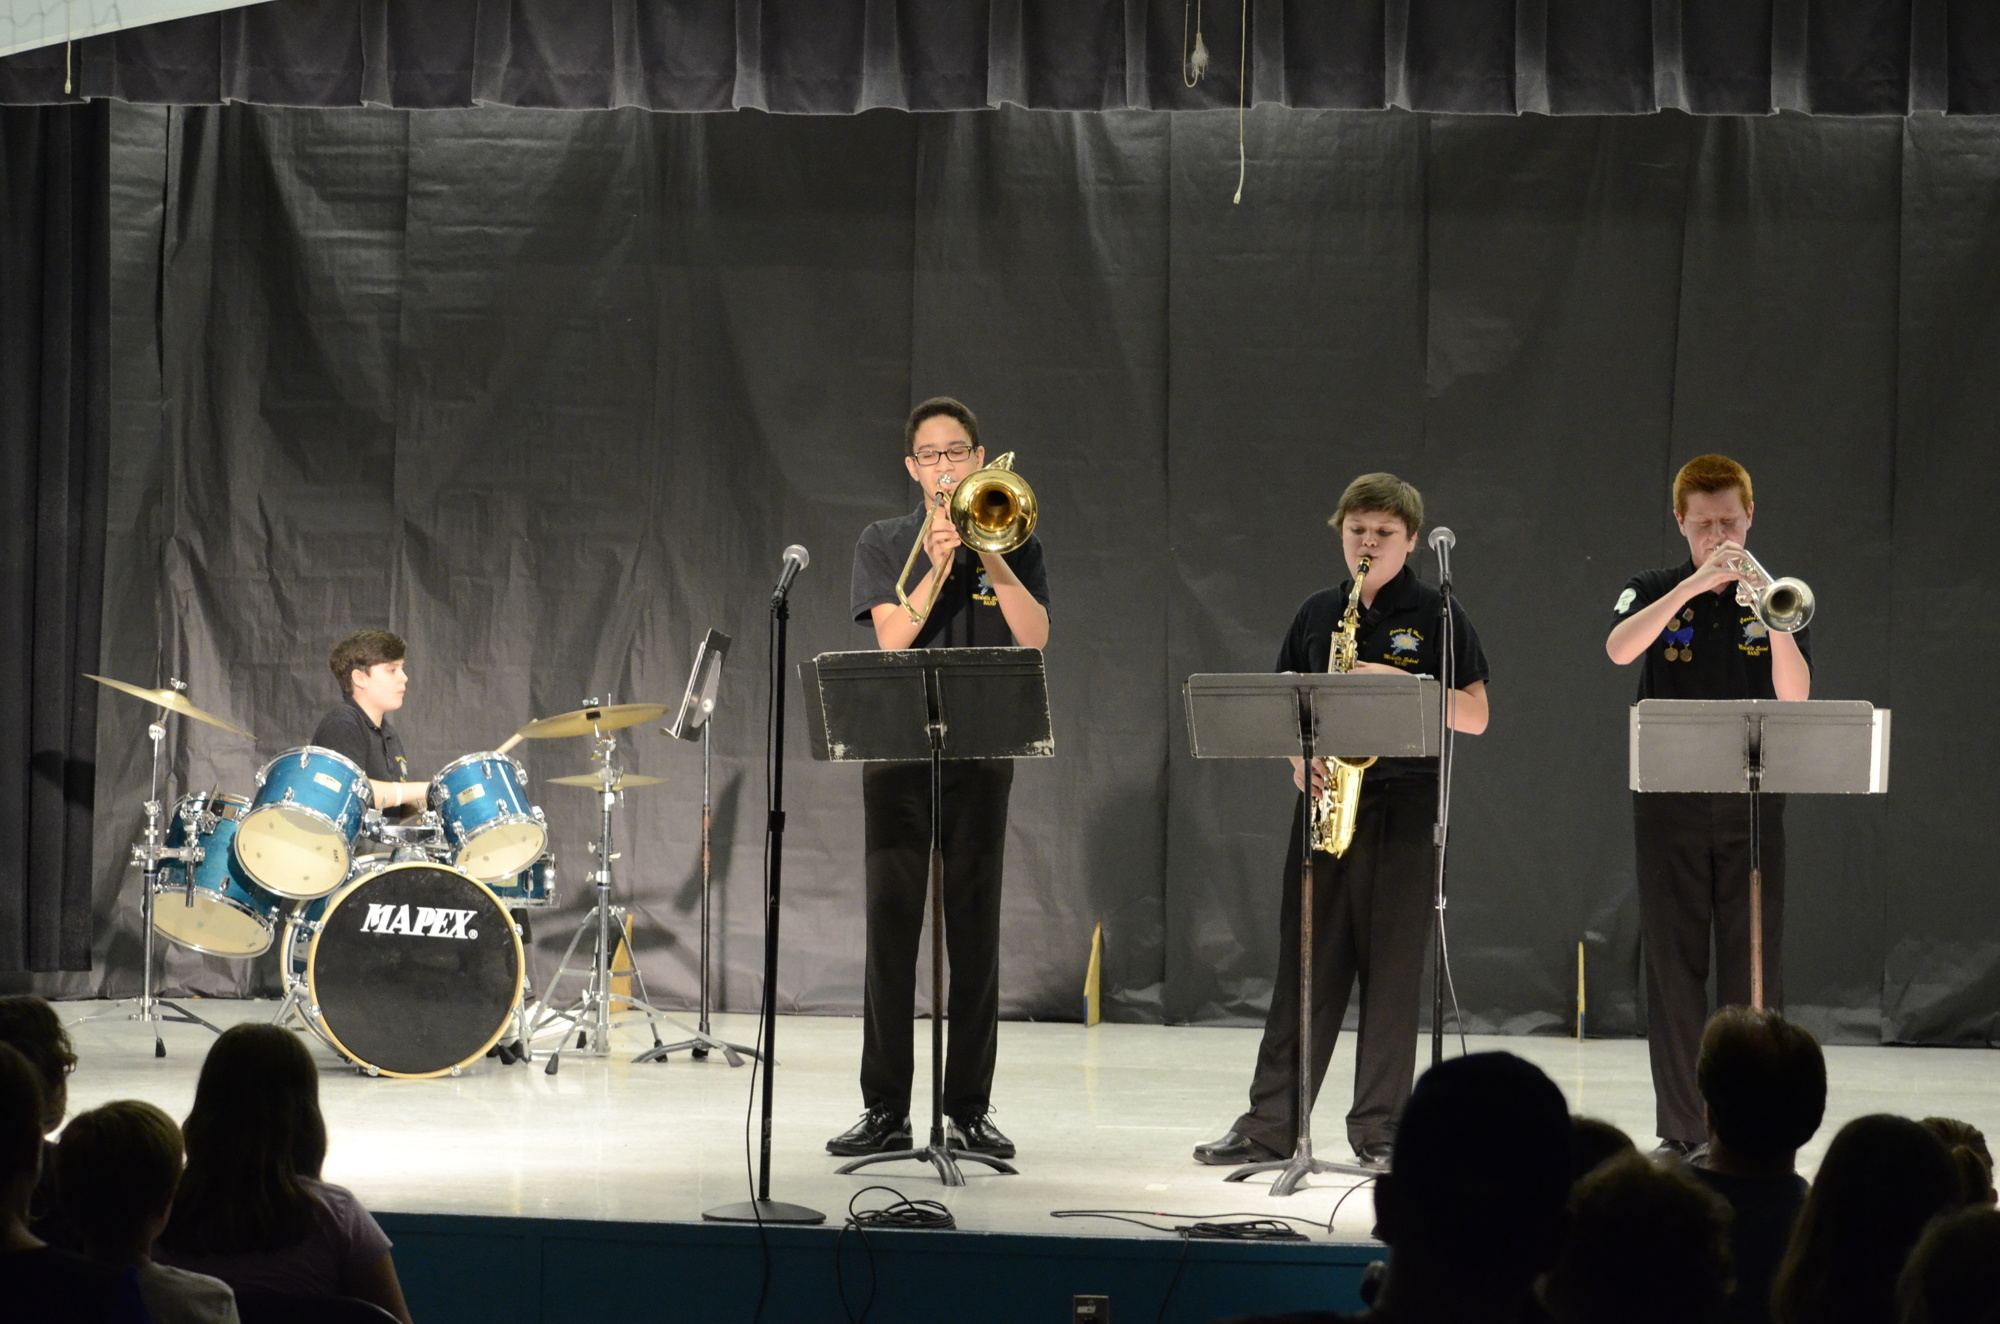 Aidan Mendel on drums, Braden Hameed on trombone, Ethan Horn on saxophone and Eric Miller on trumpet play 